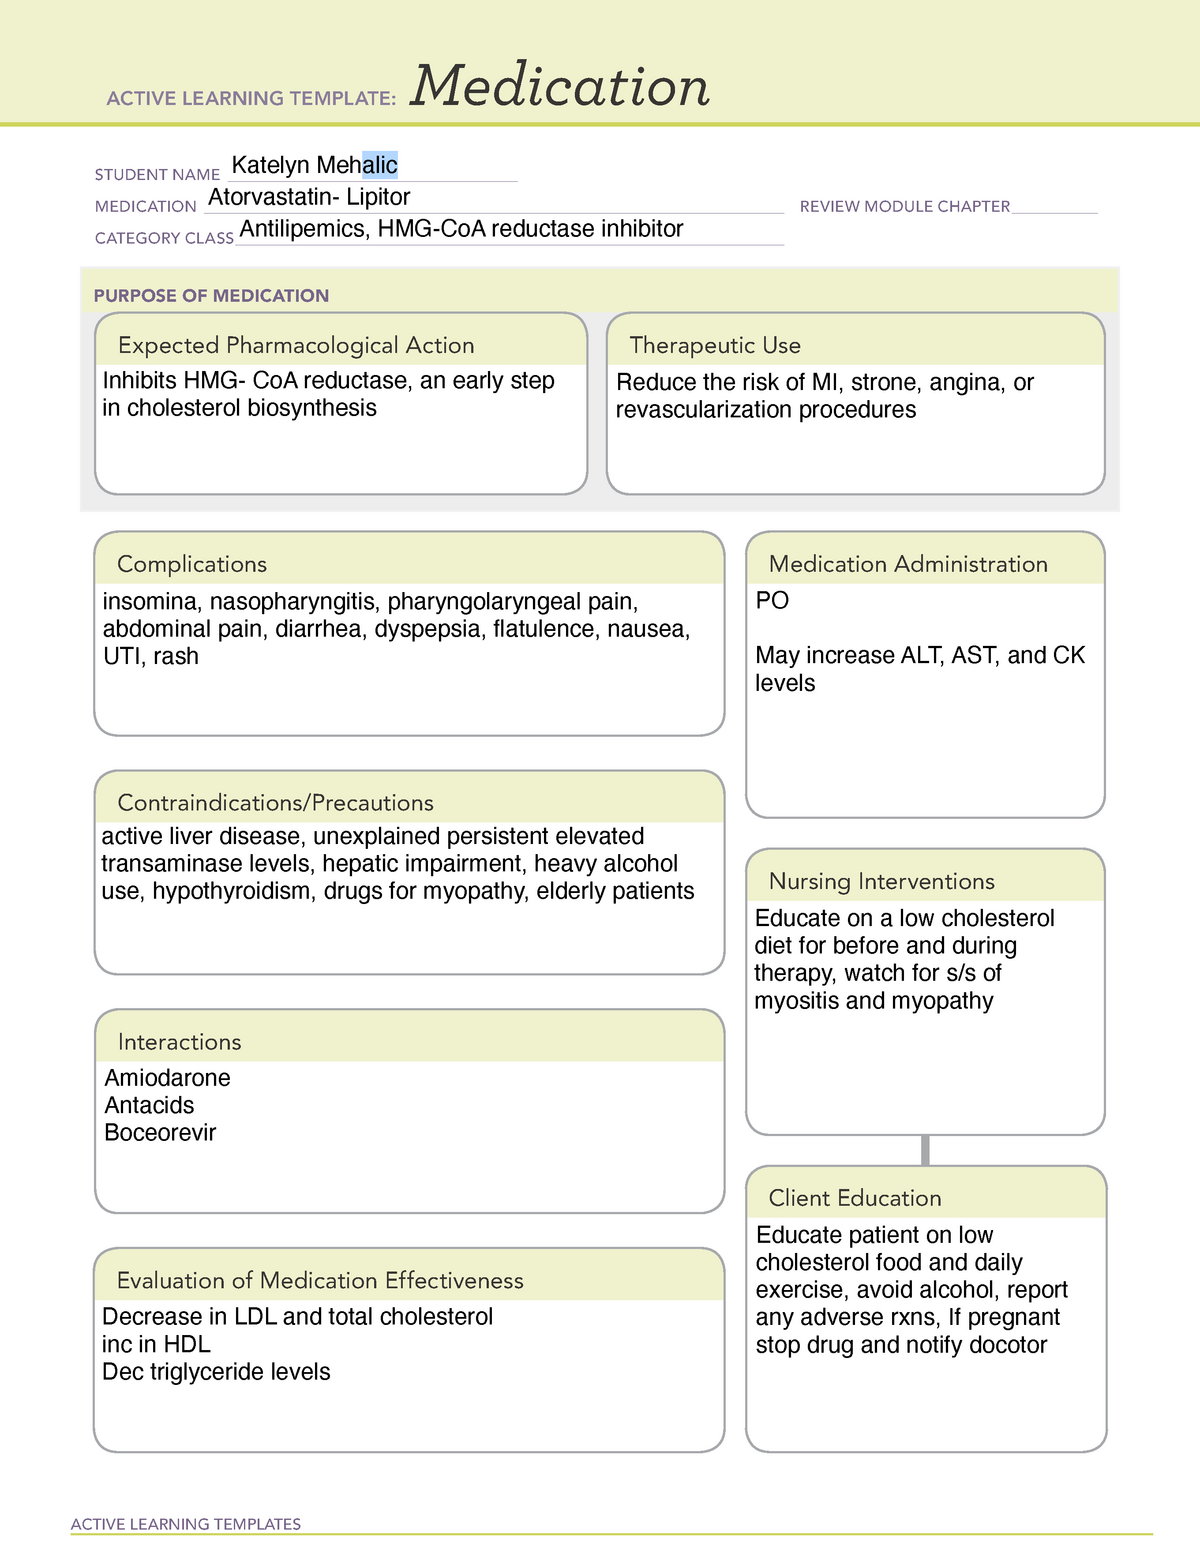 Atorvastatin lipitor med template ACTIVE LEARNING TEMPLATES